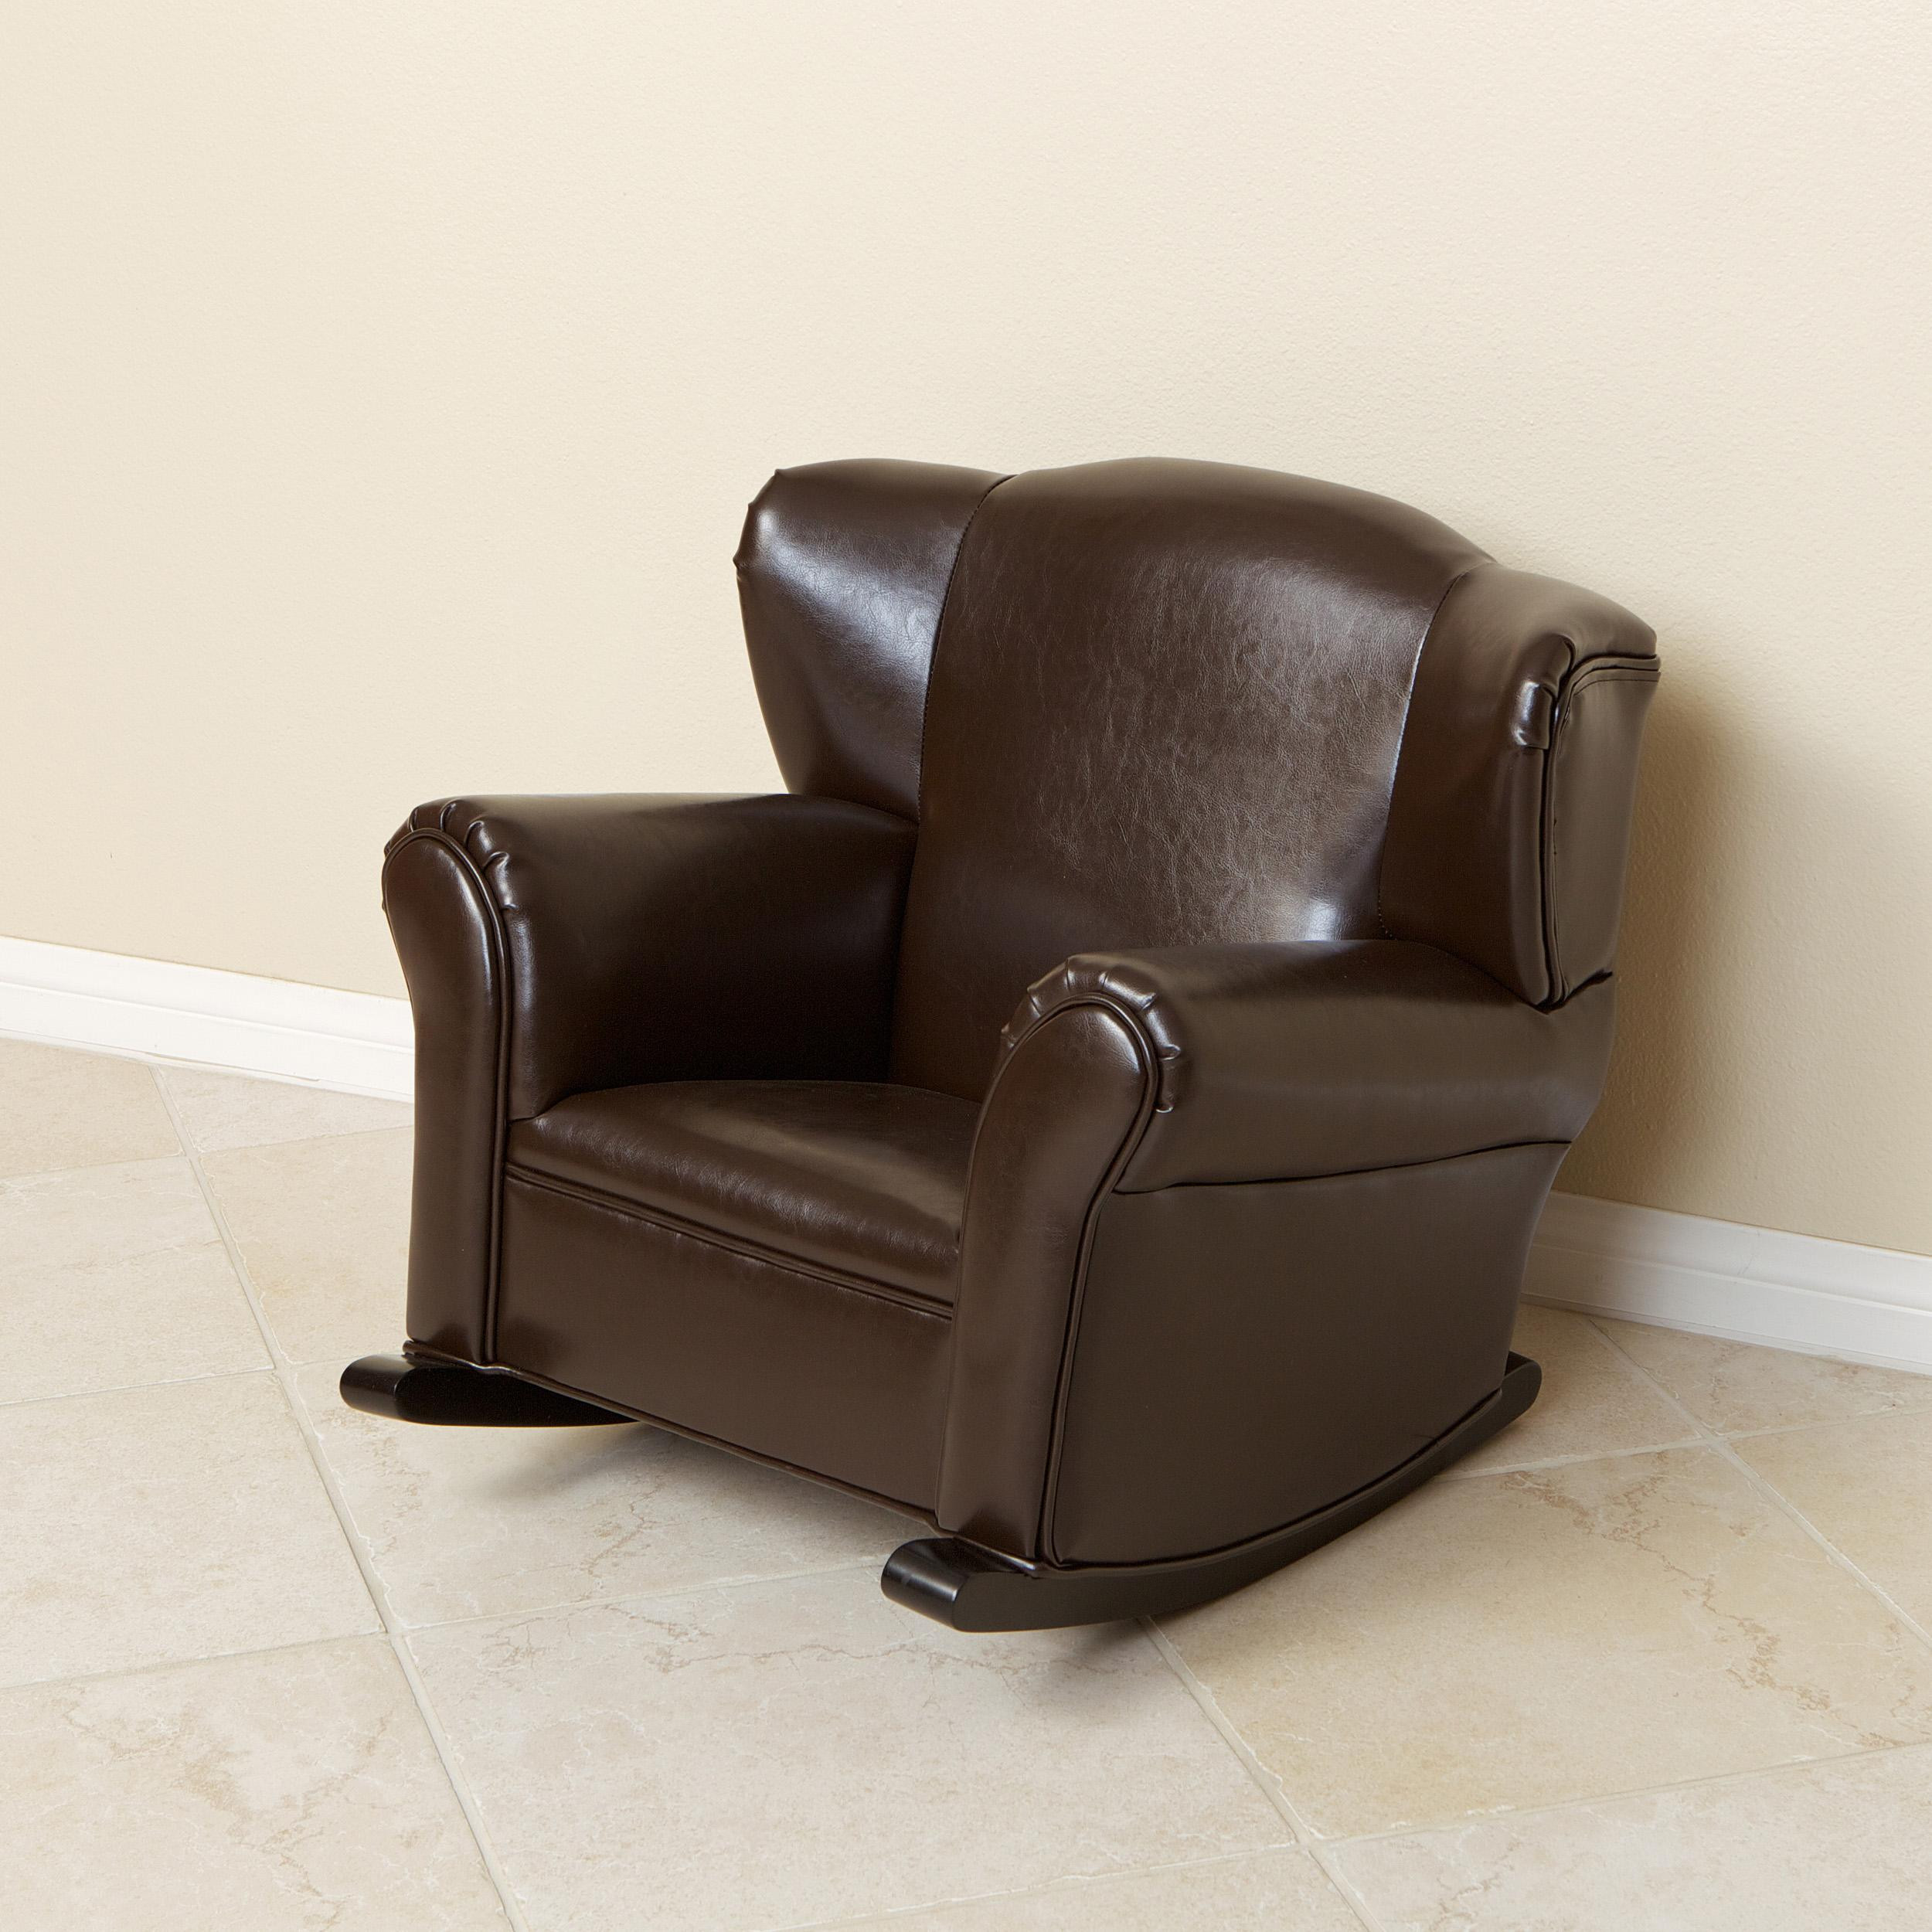 Kids Upholstered Rocking Chair
 Bonded Leather Brown Kids Rocking Chair